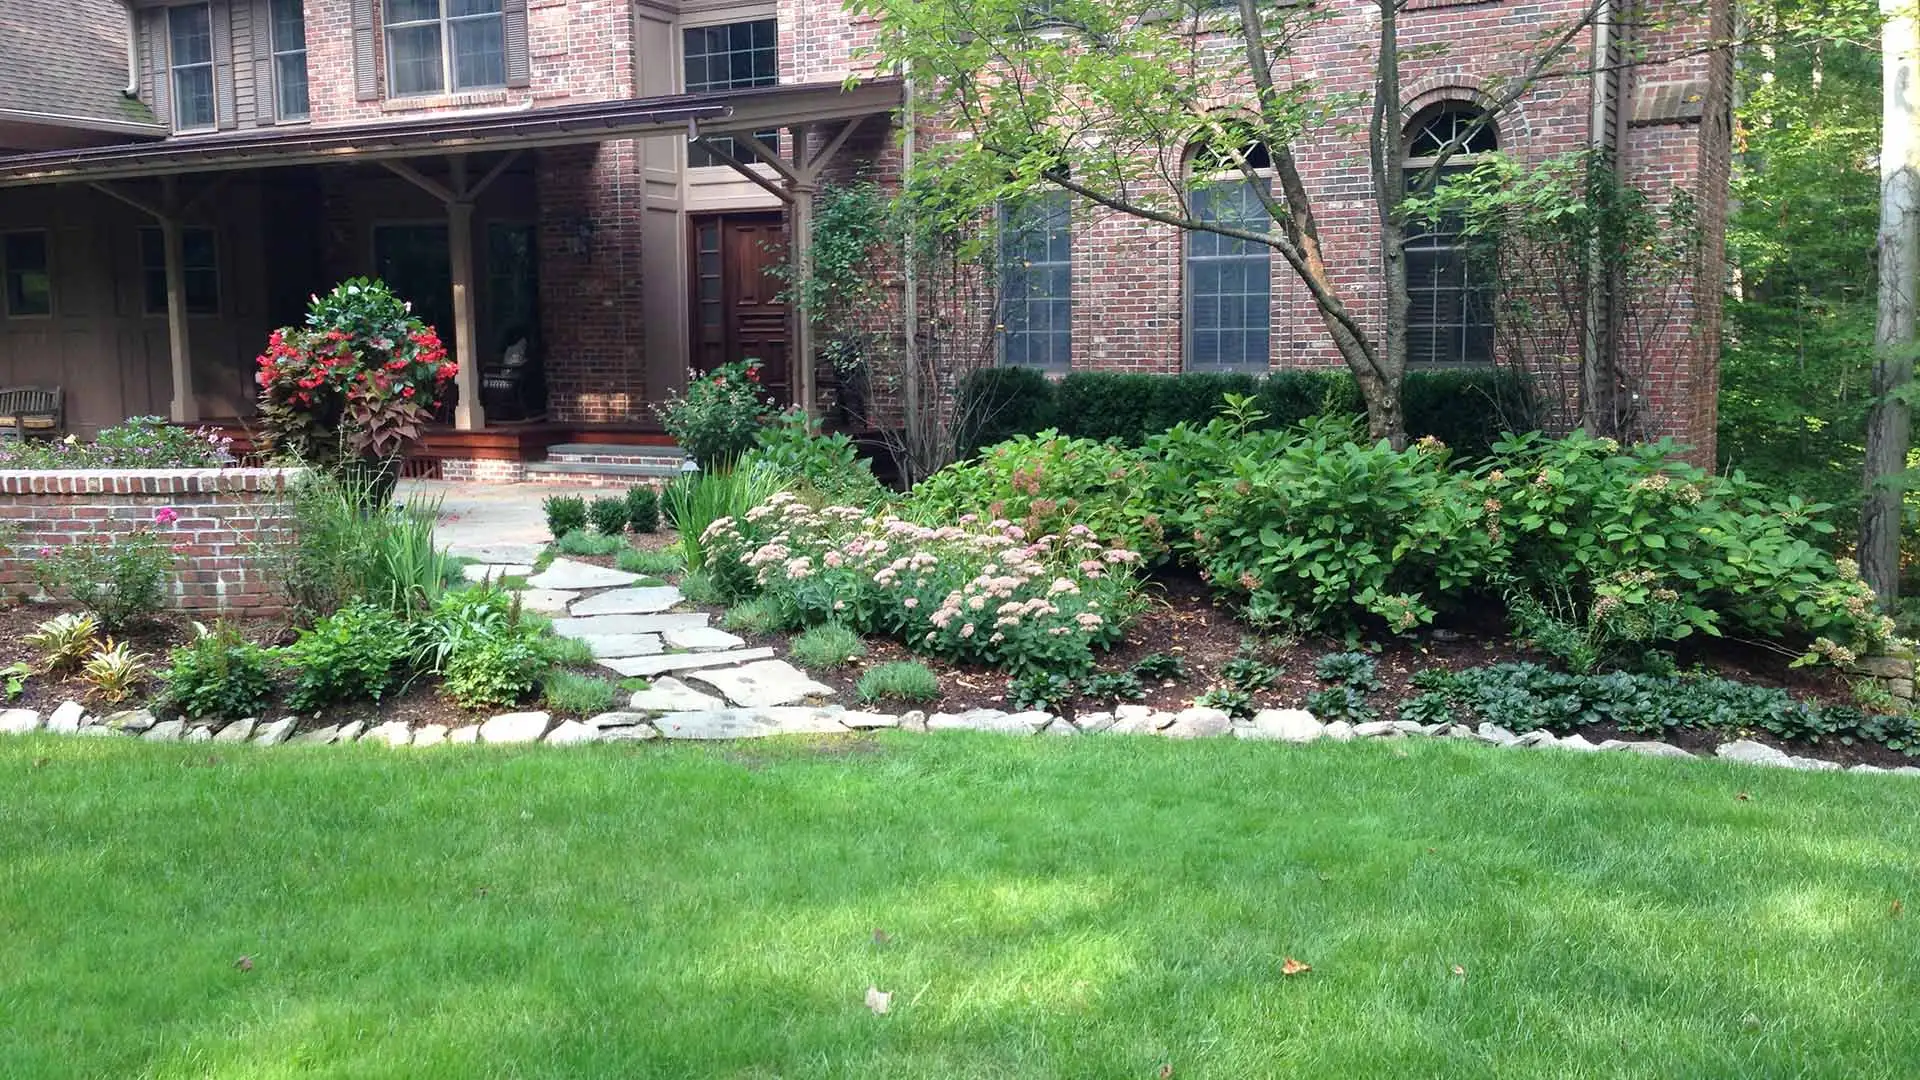 Well landscaped and healthy home lawn in Watchung, NJ.